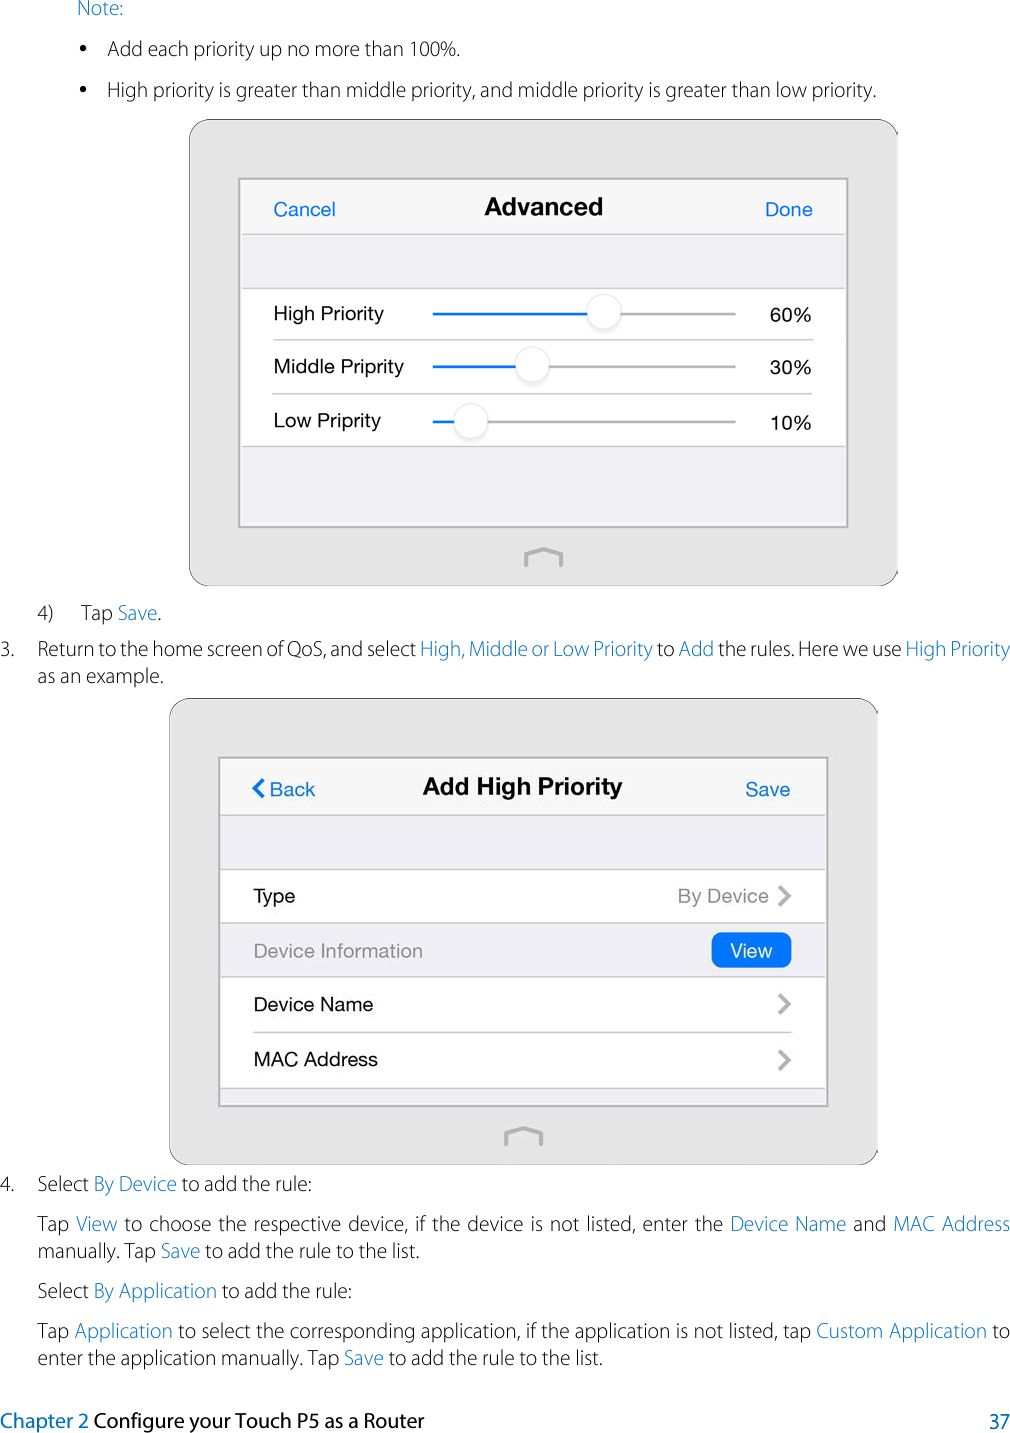  Note:  Add each priority up no more than 100%.  High priority is greater than middle priority, and middle priority is greater than low priority.  4) Tap Save. 3. Return to the home screen of QoS, and select High, Middle or Low Priority to Add the rules. Here we use High Priority as an example.  4. Select By Device to add the rule: Tap View to choose the respective device, if the device is not listed, enter the Device Name and MAC Address manually. Tap Save to add the rule to the list. Select By Application to add the rule: Tap Application to select the corresponding application, if the application is not listed, tap Custom Application to enter the application manually. Tap Save to add the rule to the list. Chapter 2 Configure your Touch P5 as a Router 37 